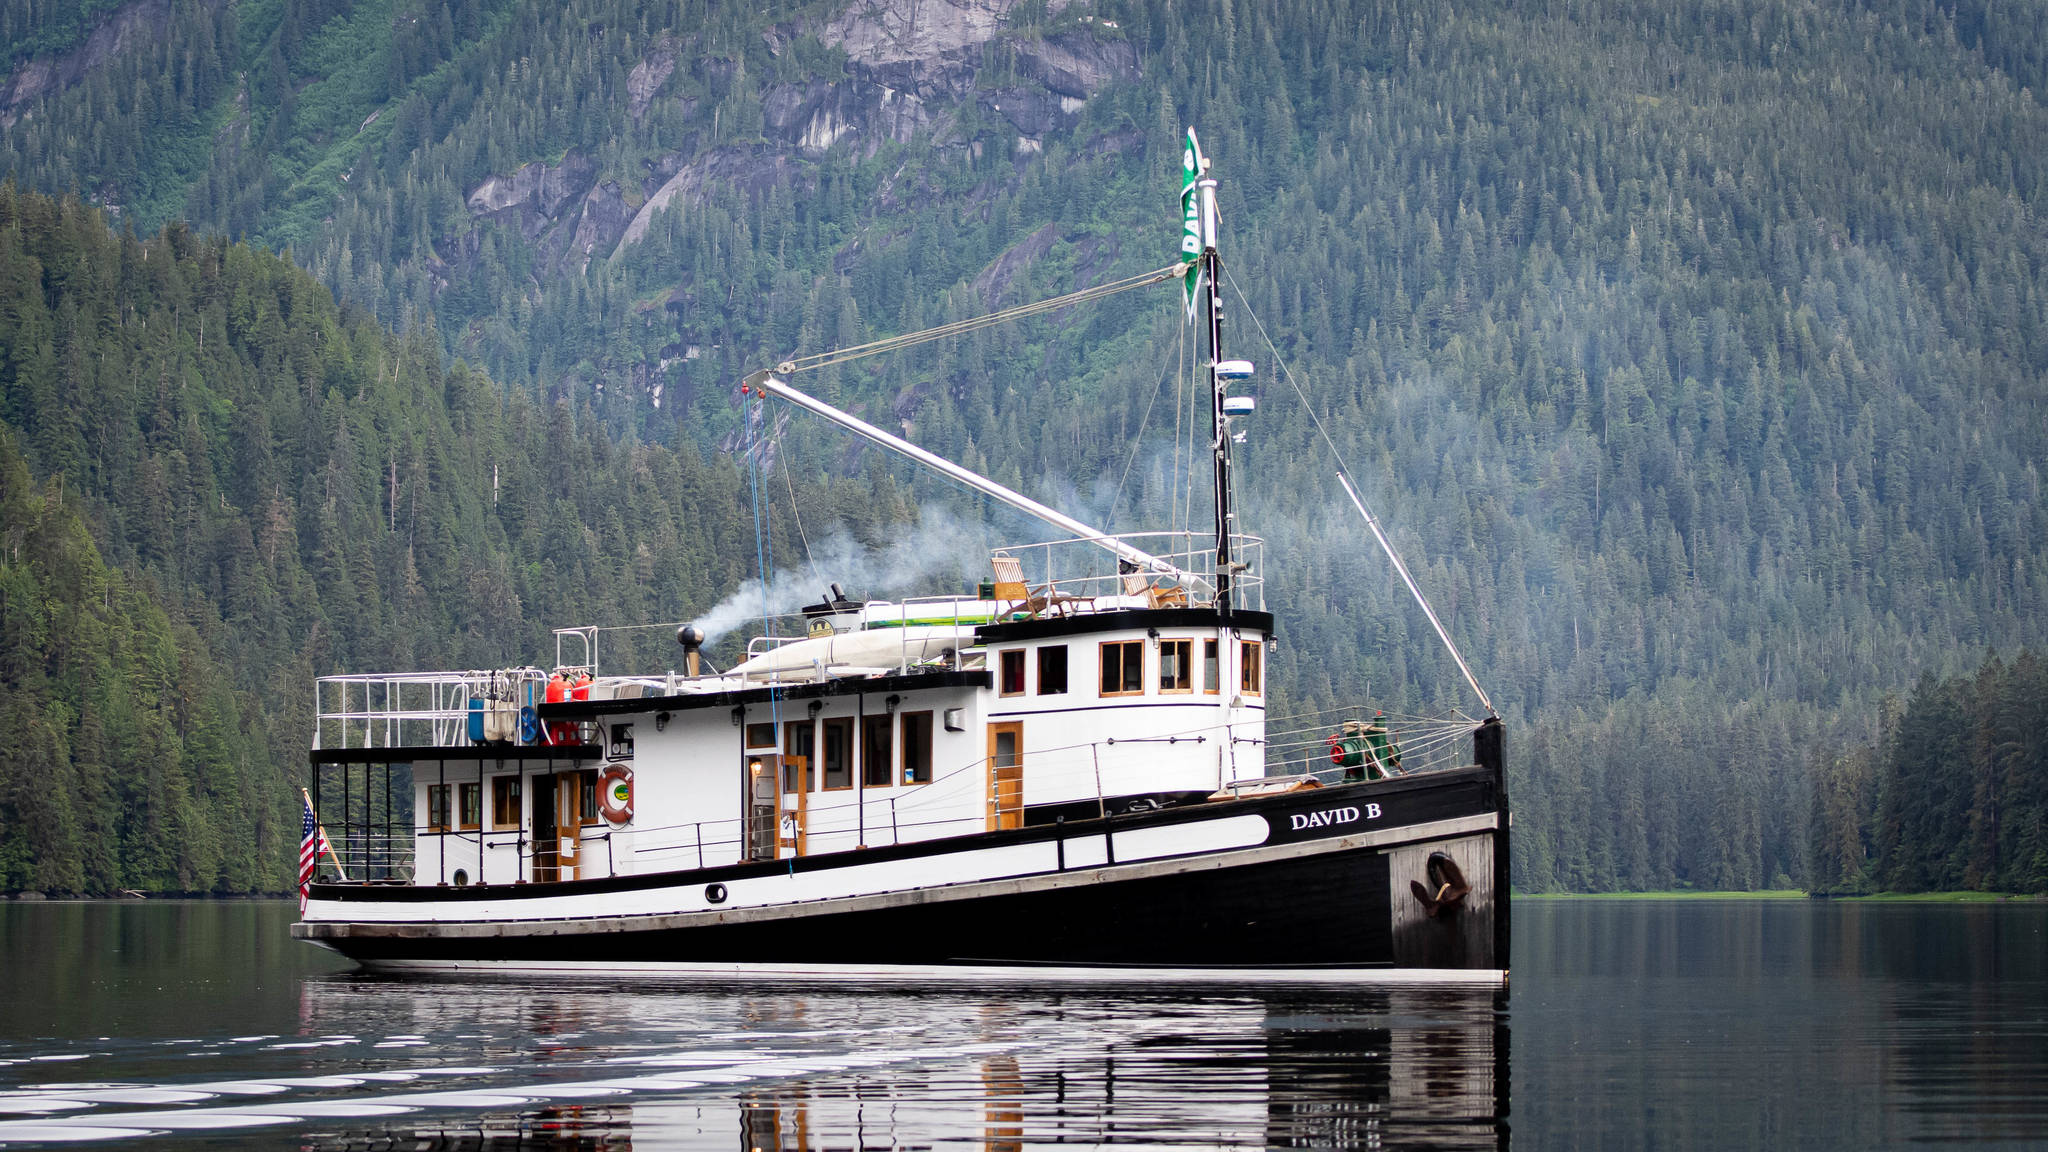 The David B is anchored in Misty Fiords. The boat was built in 1929 at a shipyard on Lake Washington for the Libby, McNeil and Libby Company. That company owned a cannery in Bristol Bay. The boat was named after David W. Branch, the general manager of the company’s salmon operation. (Courtesy Photo | Christine Smith)